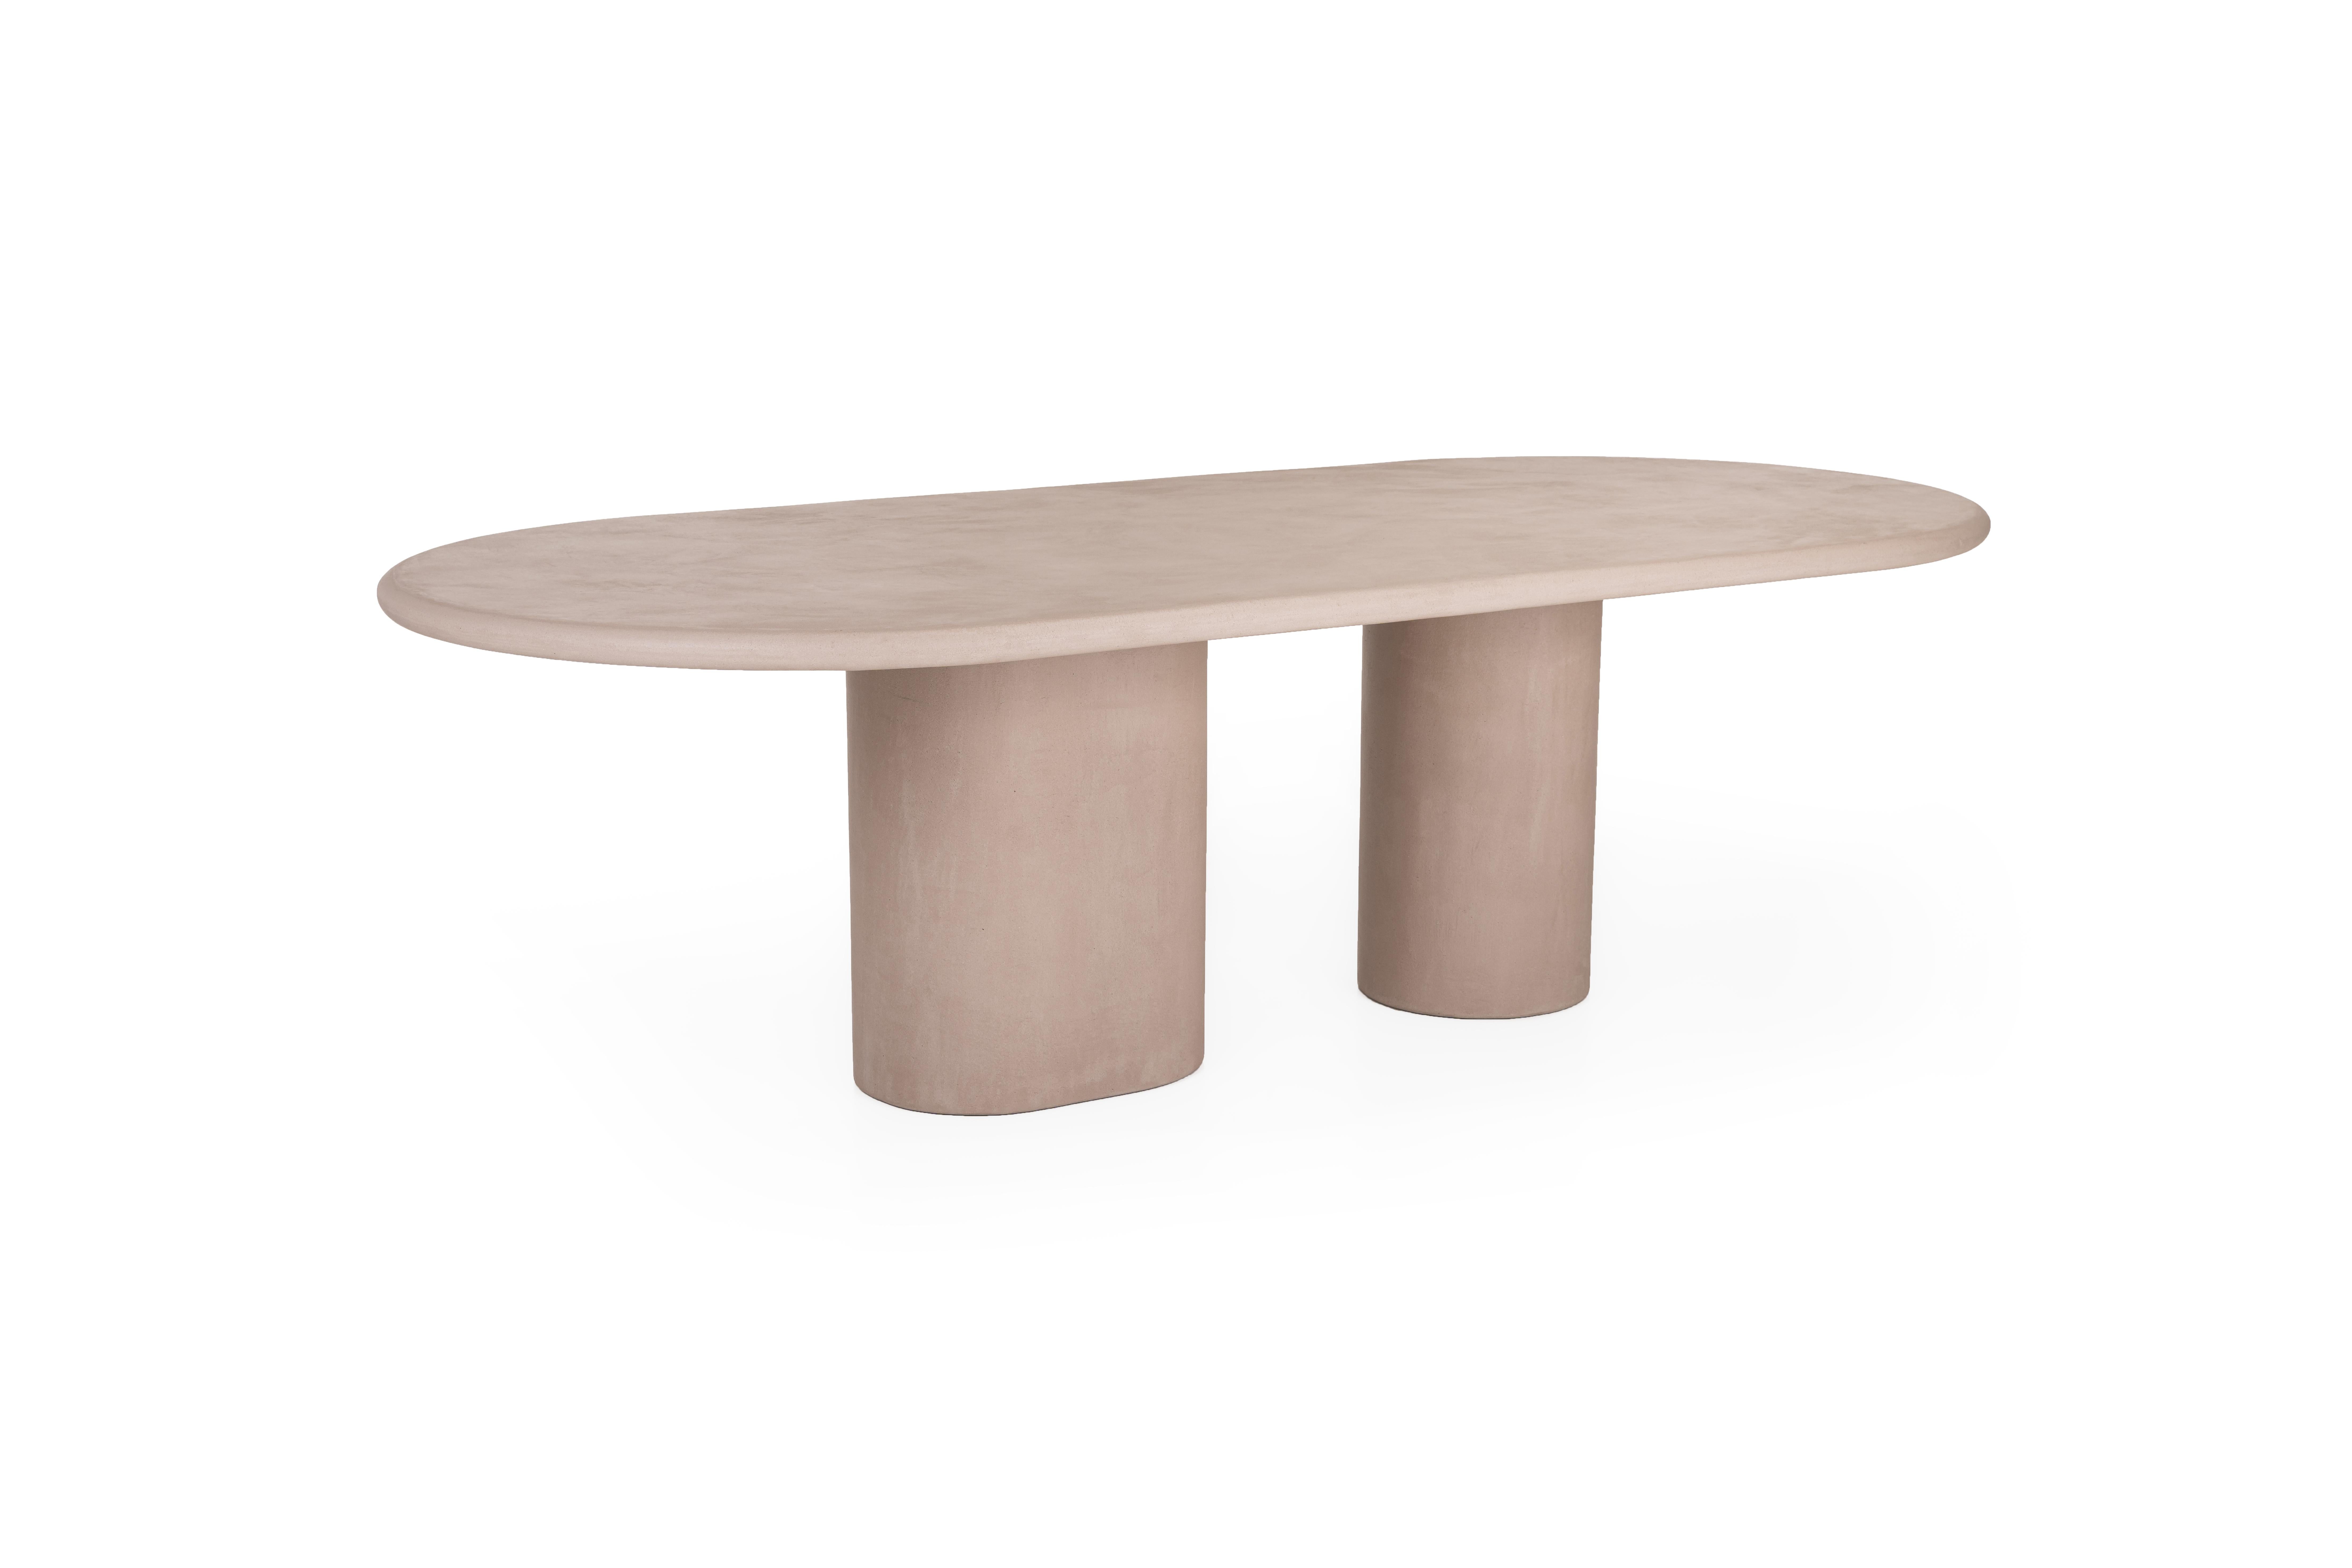 Contemporary Belgian design / Handcrafted / Organic shape / Ecological material / Natural lime plaster / Concrete look / Made on demand

Latin adjective “columna” /koˈlum. na/: column, pillar.
Color pictures: BM19 Cacao Mid

The Column dining table